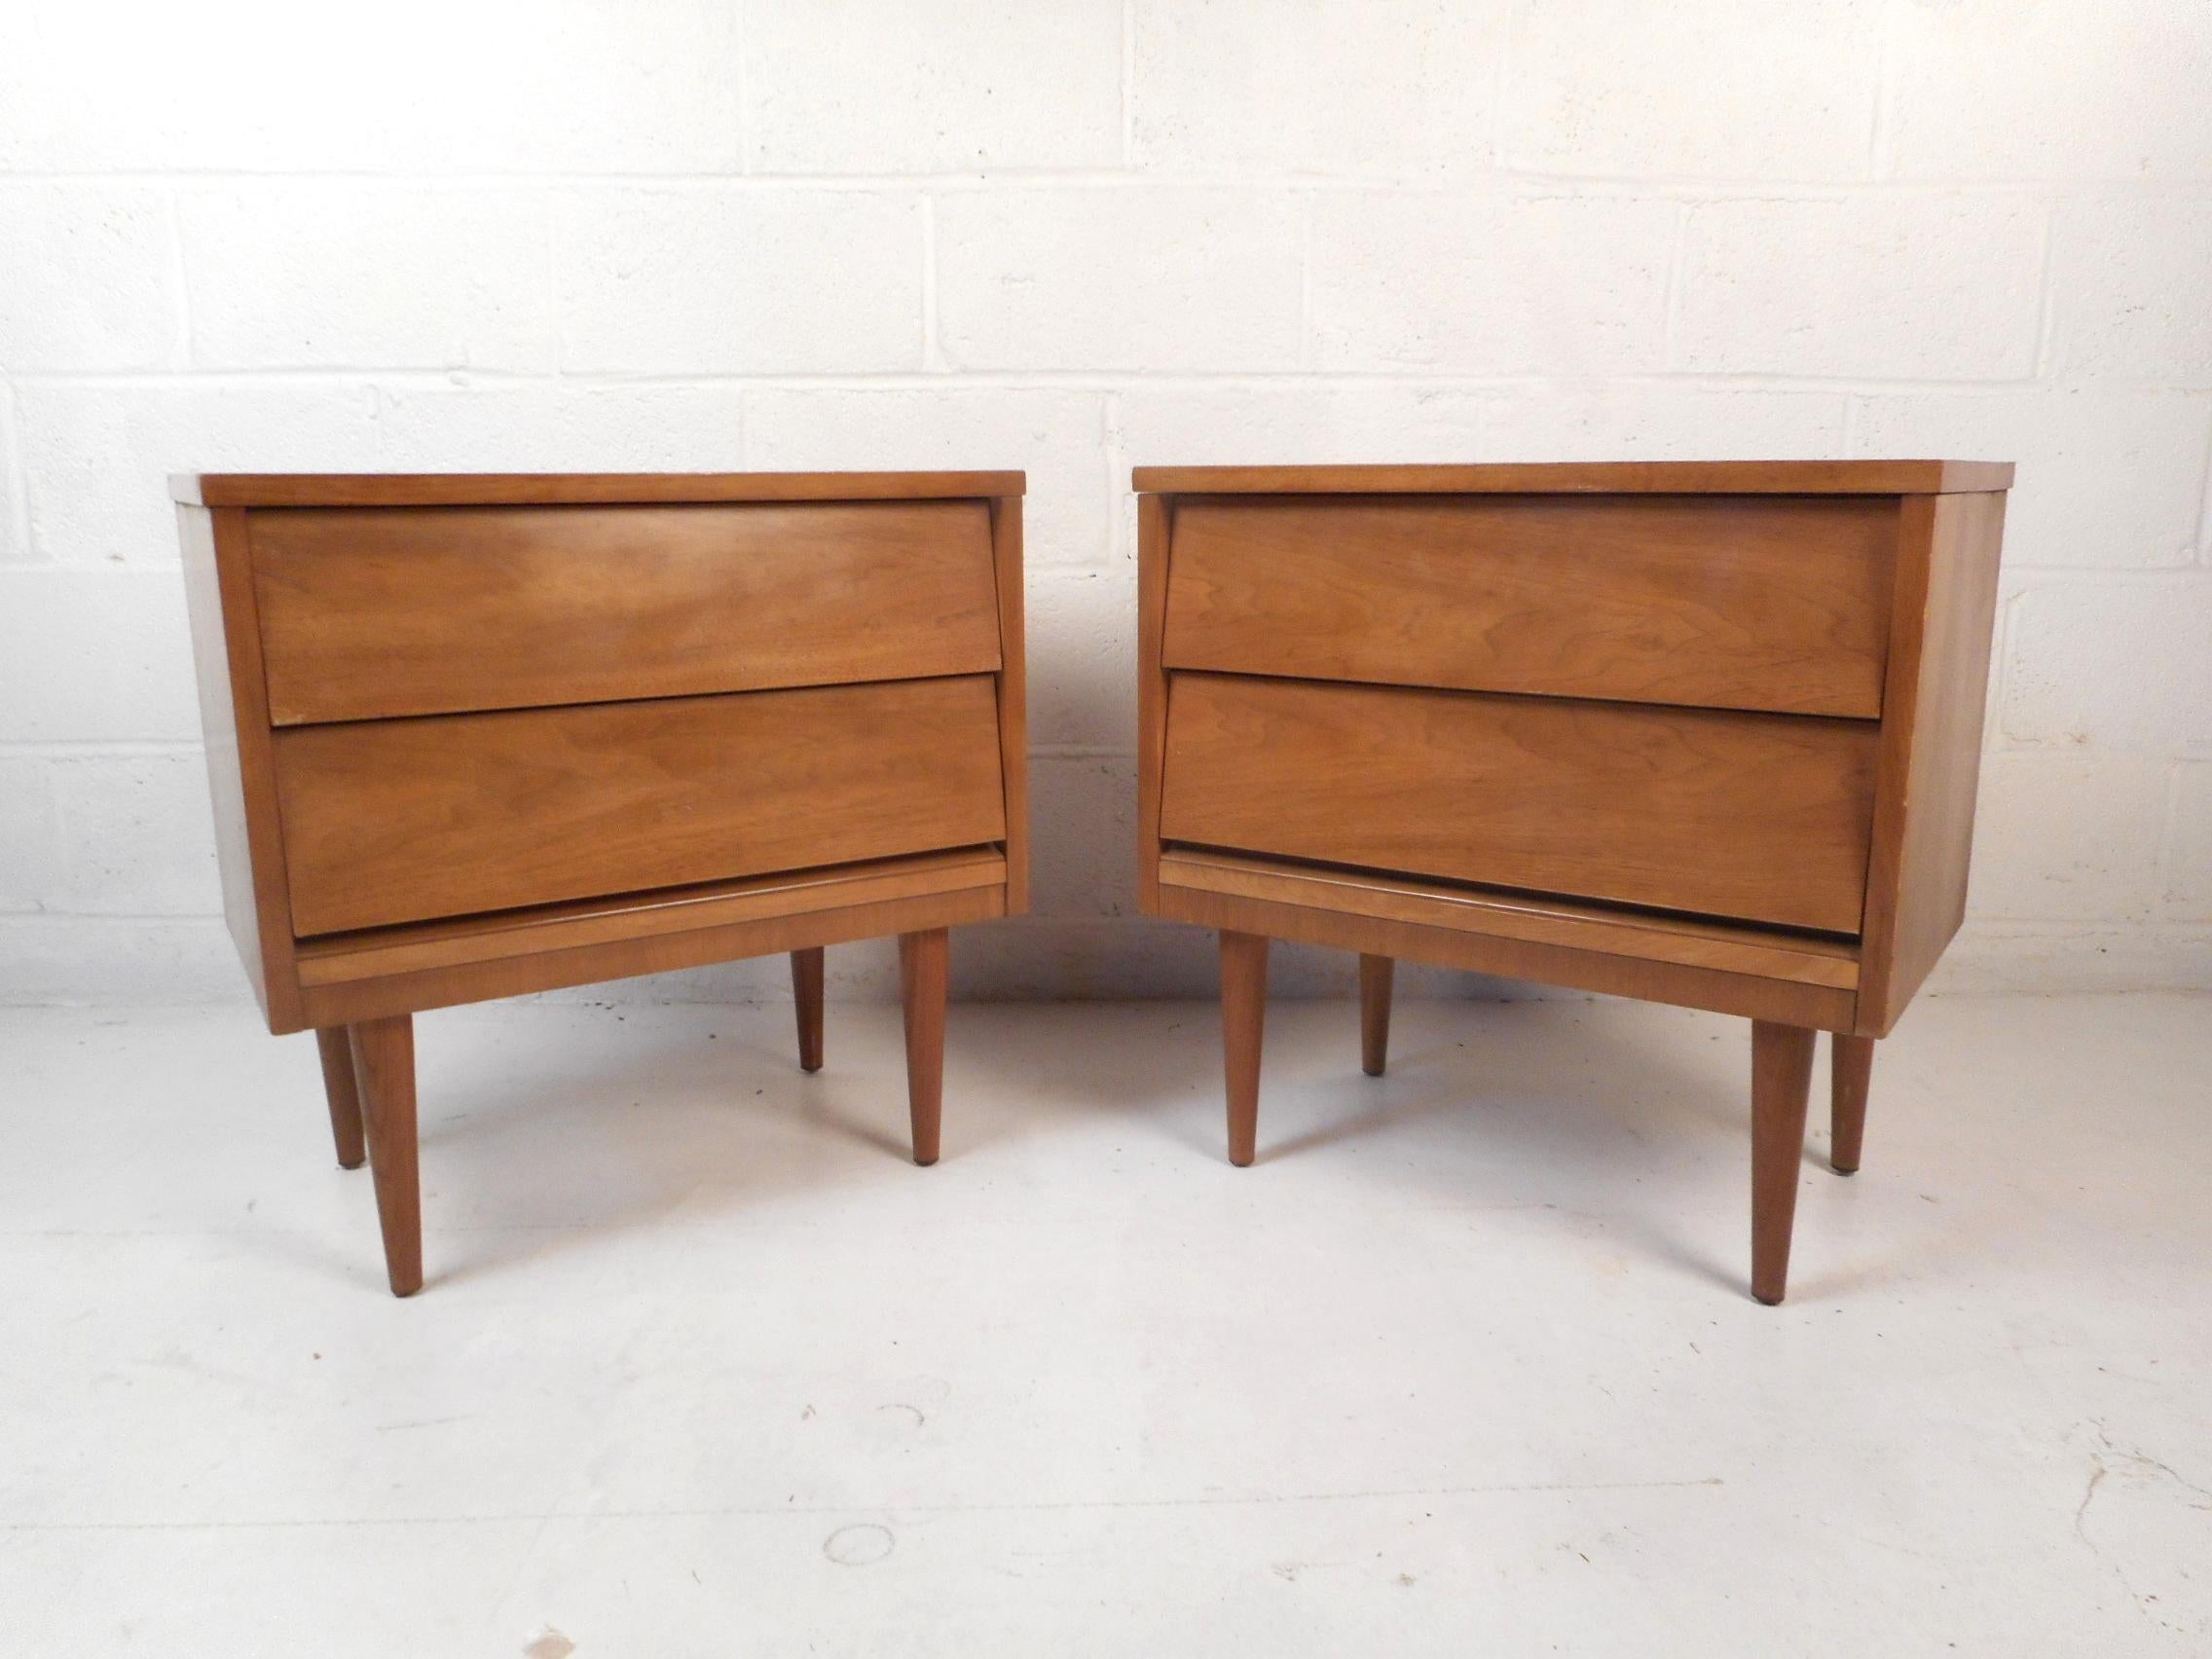 American Mid-Century Modern Dresser and Nightstands by Dixie Furniture